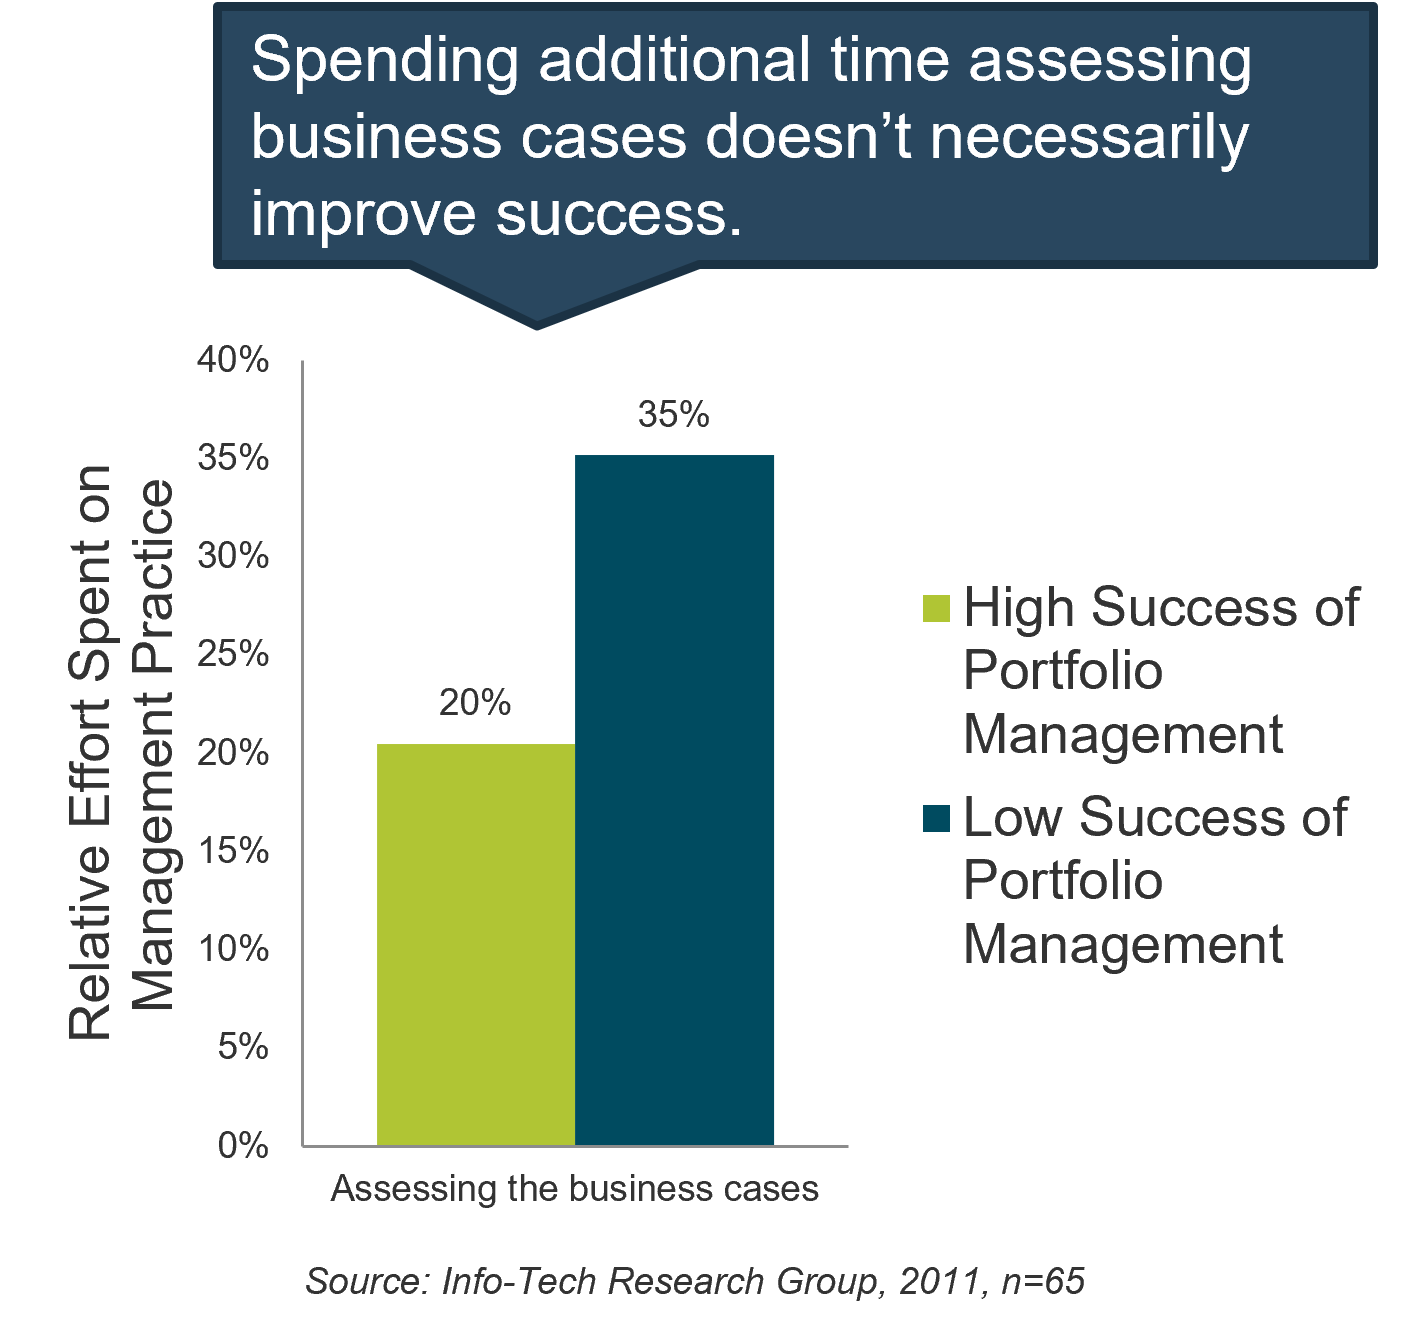 A double bar graph is depicted to show the relative effort spent on management practice. The first bar shows that 20% has a high success of portfolio management. 35% has a low success of portfolio management. A caption on the graph: Spending additional time assessing business cases doesn’t necessarily improve success.